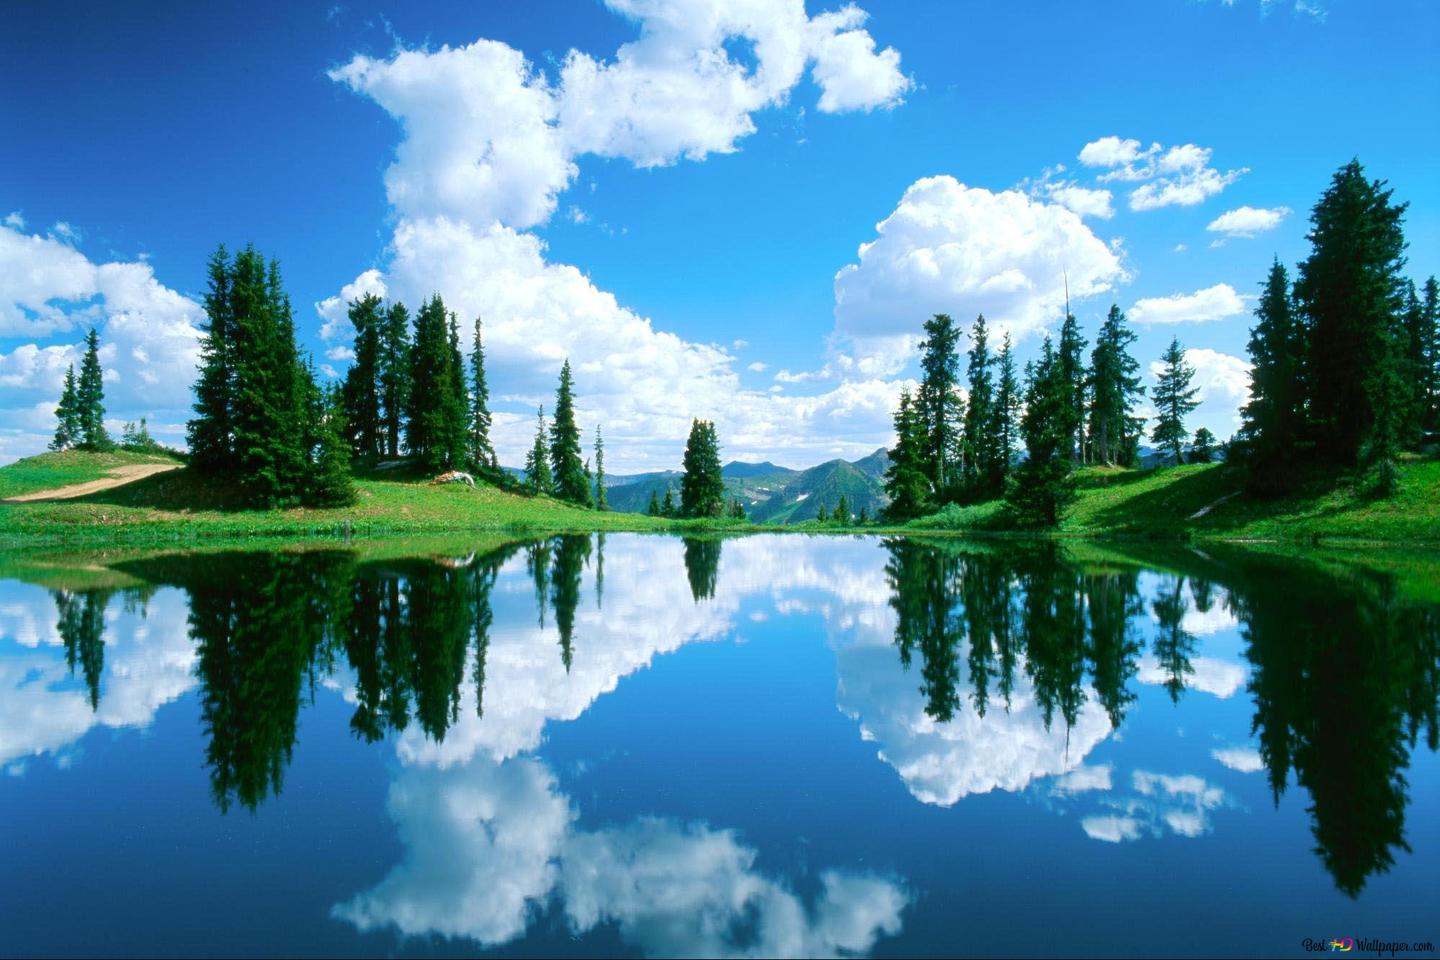 Wonderful view of trees and clouds reflected in the lake HD wallpaper download